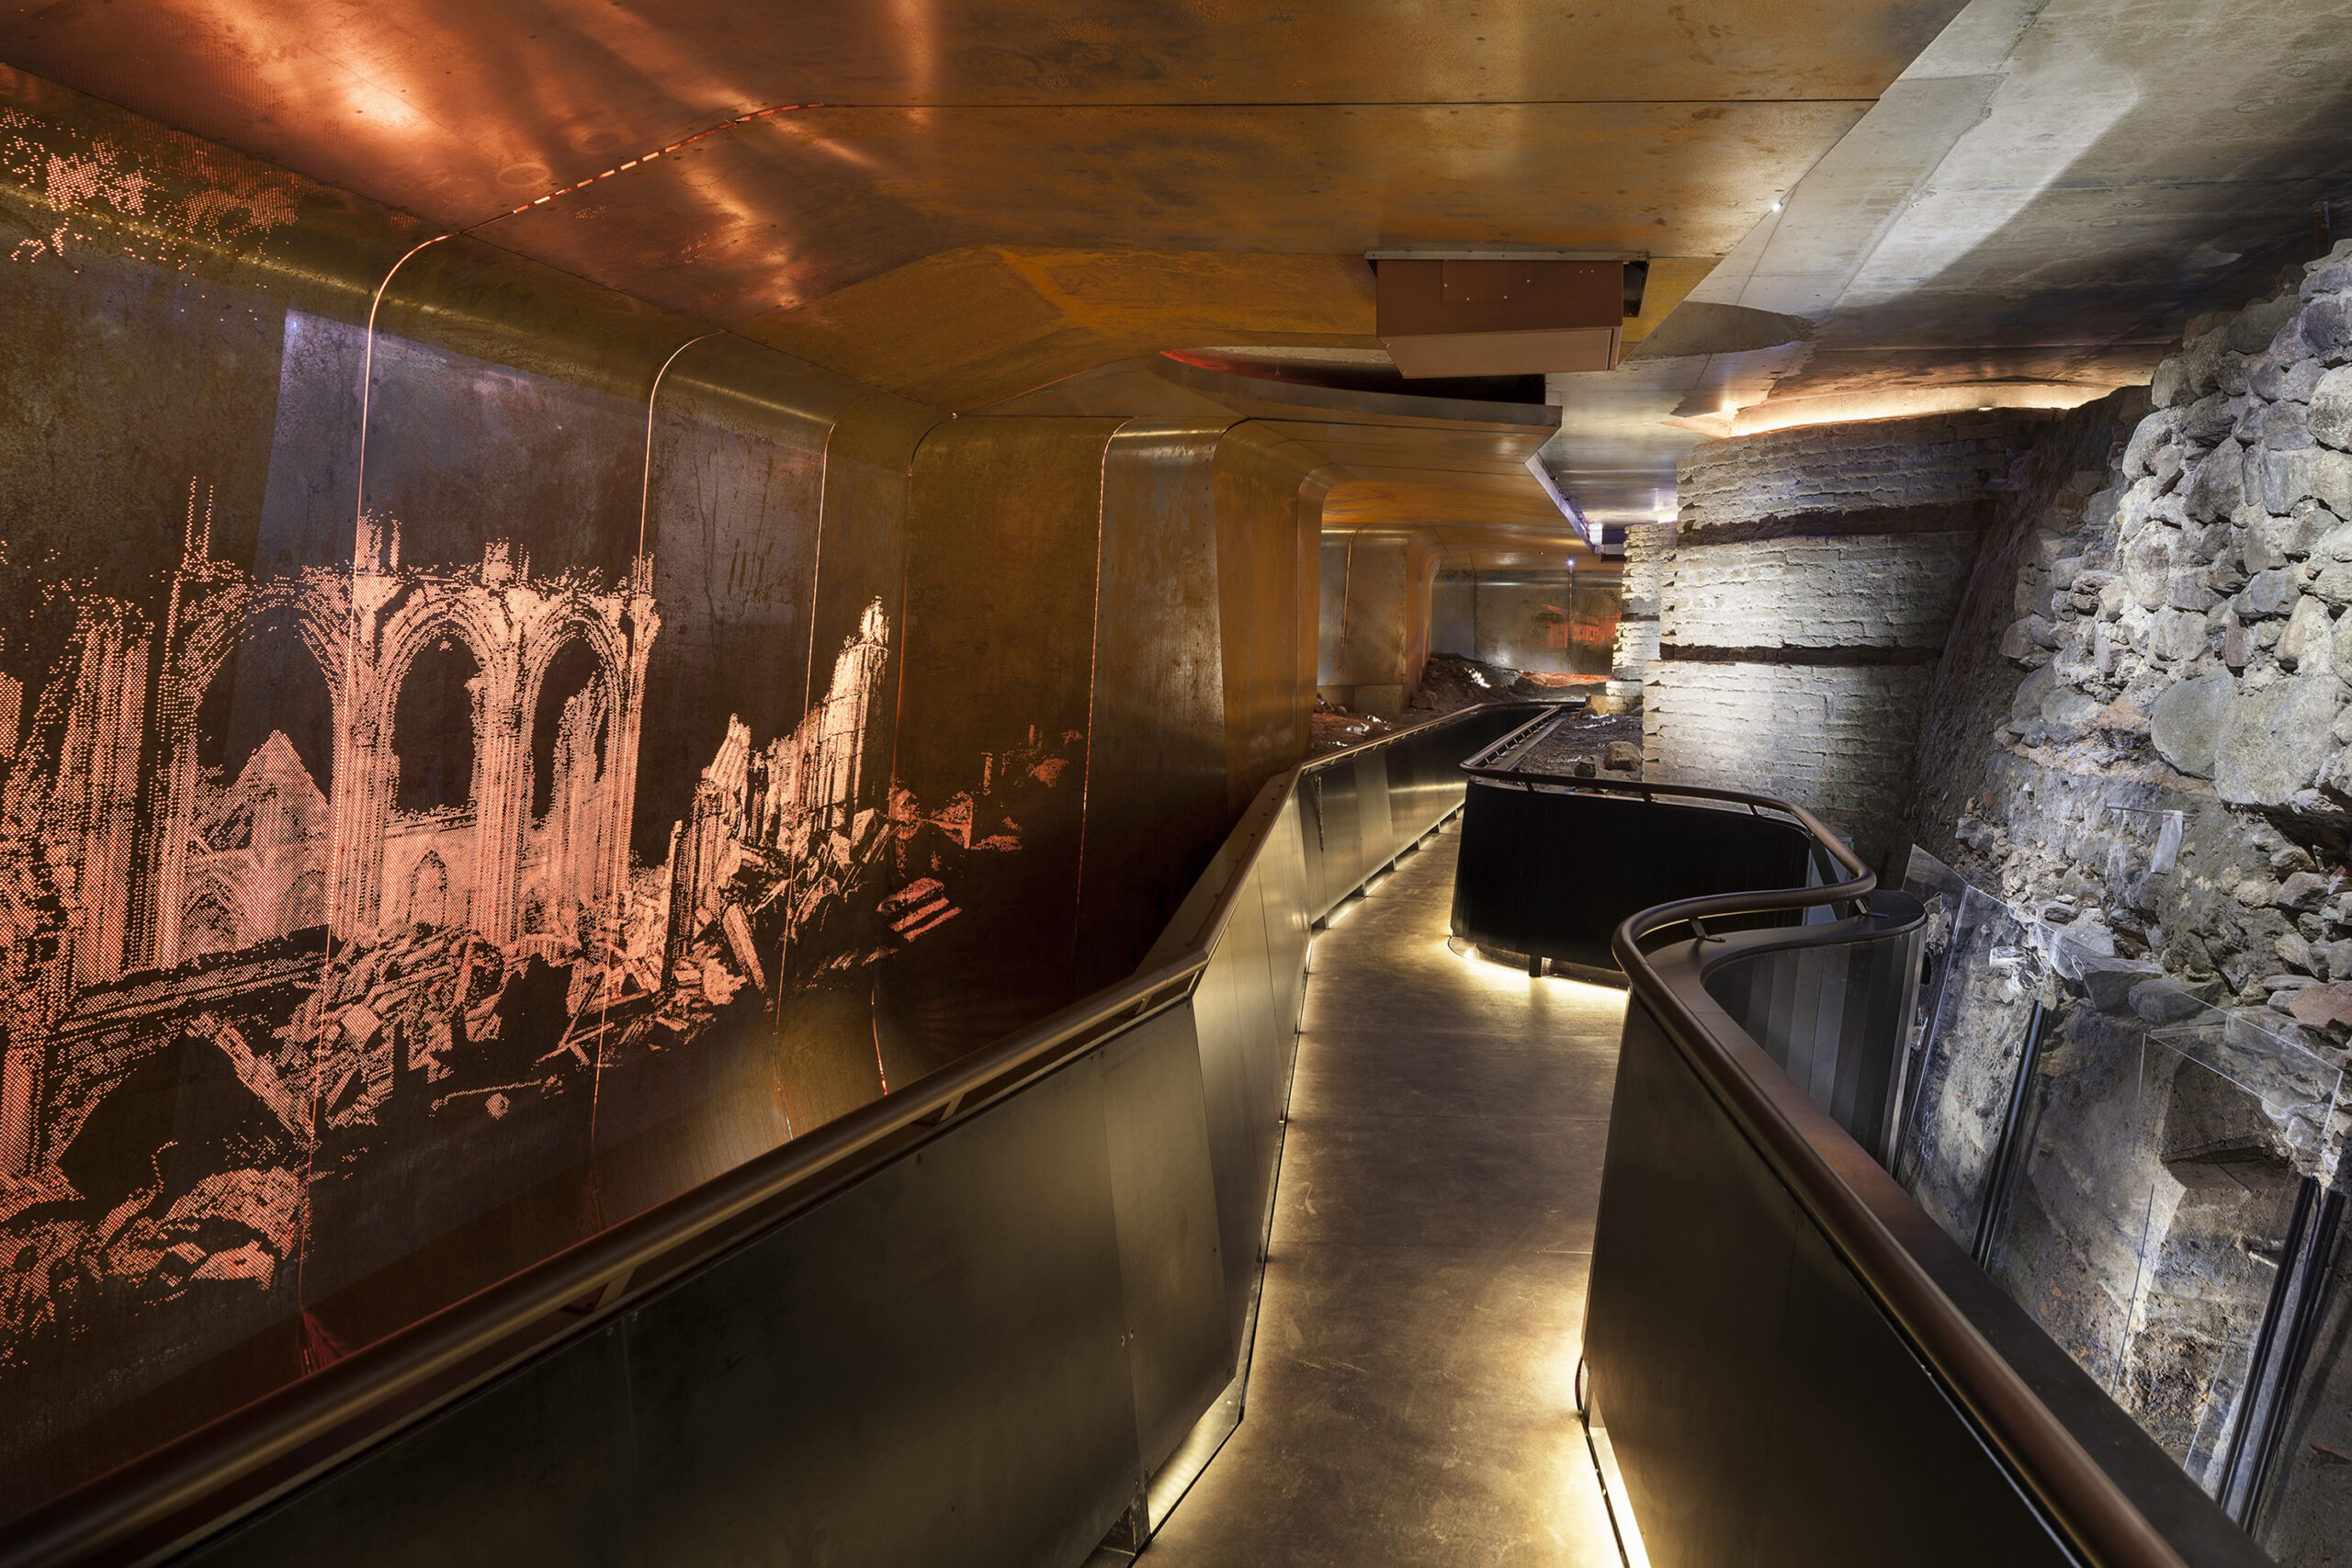 A narrow path and interactive multimedia displays on the walls of DOMunder by Tinker imagineers